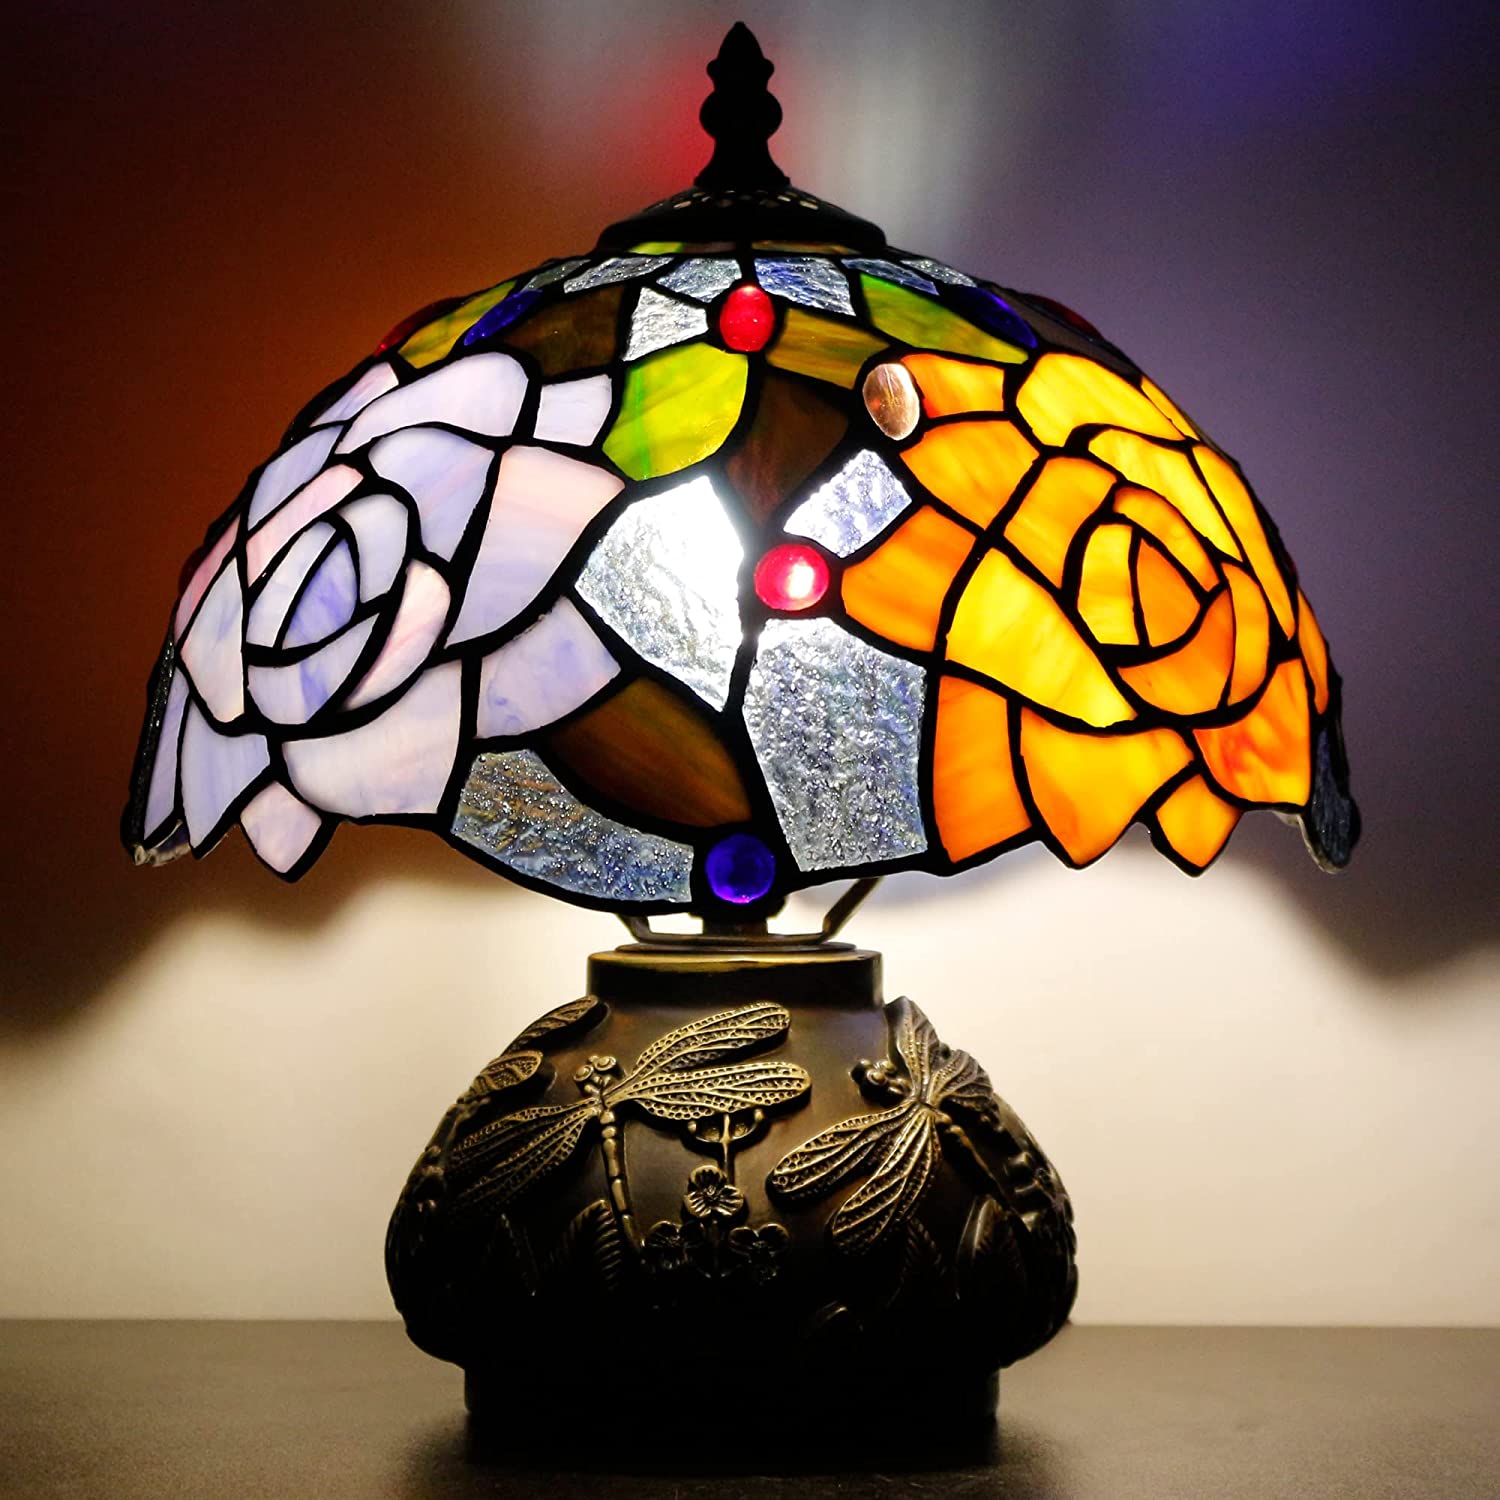 Werfactory® Tiffany Table Lamp Rose Style Stained Glass Lamp with Mushroom Base